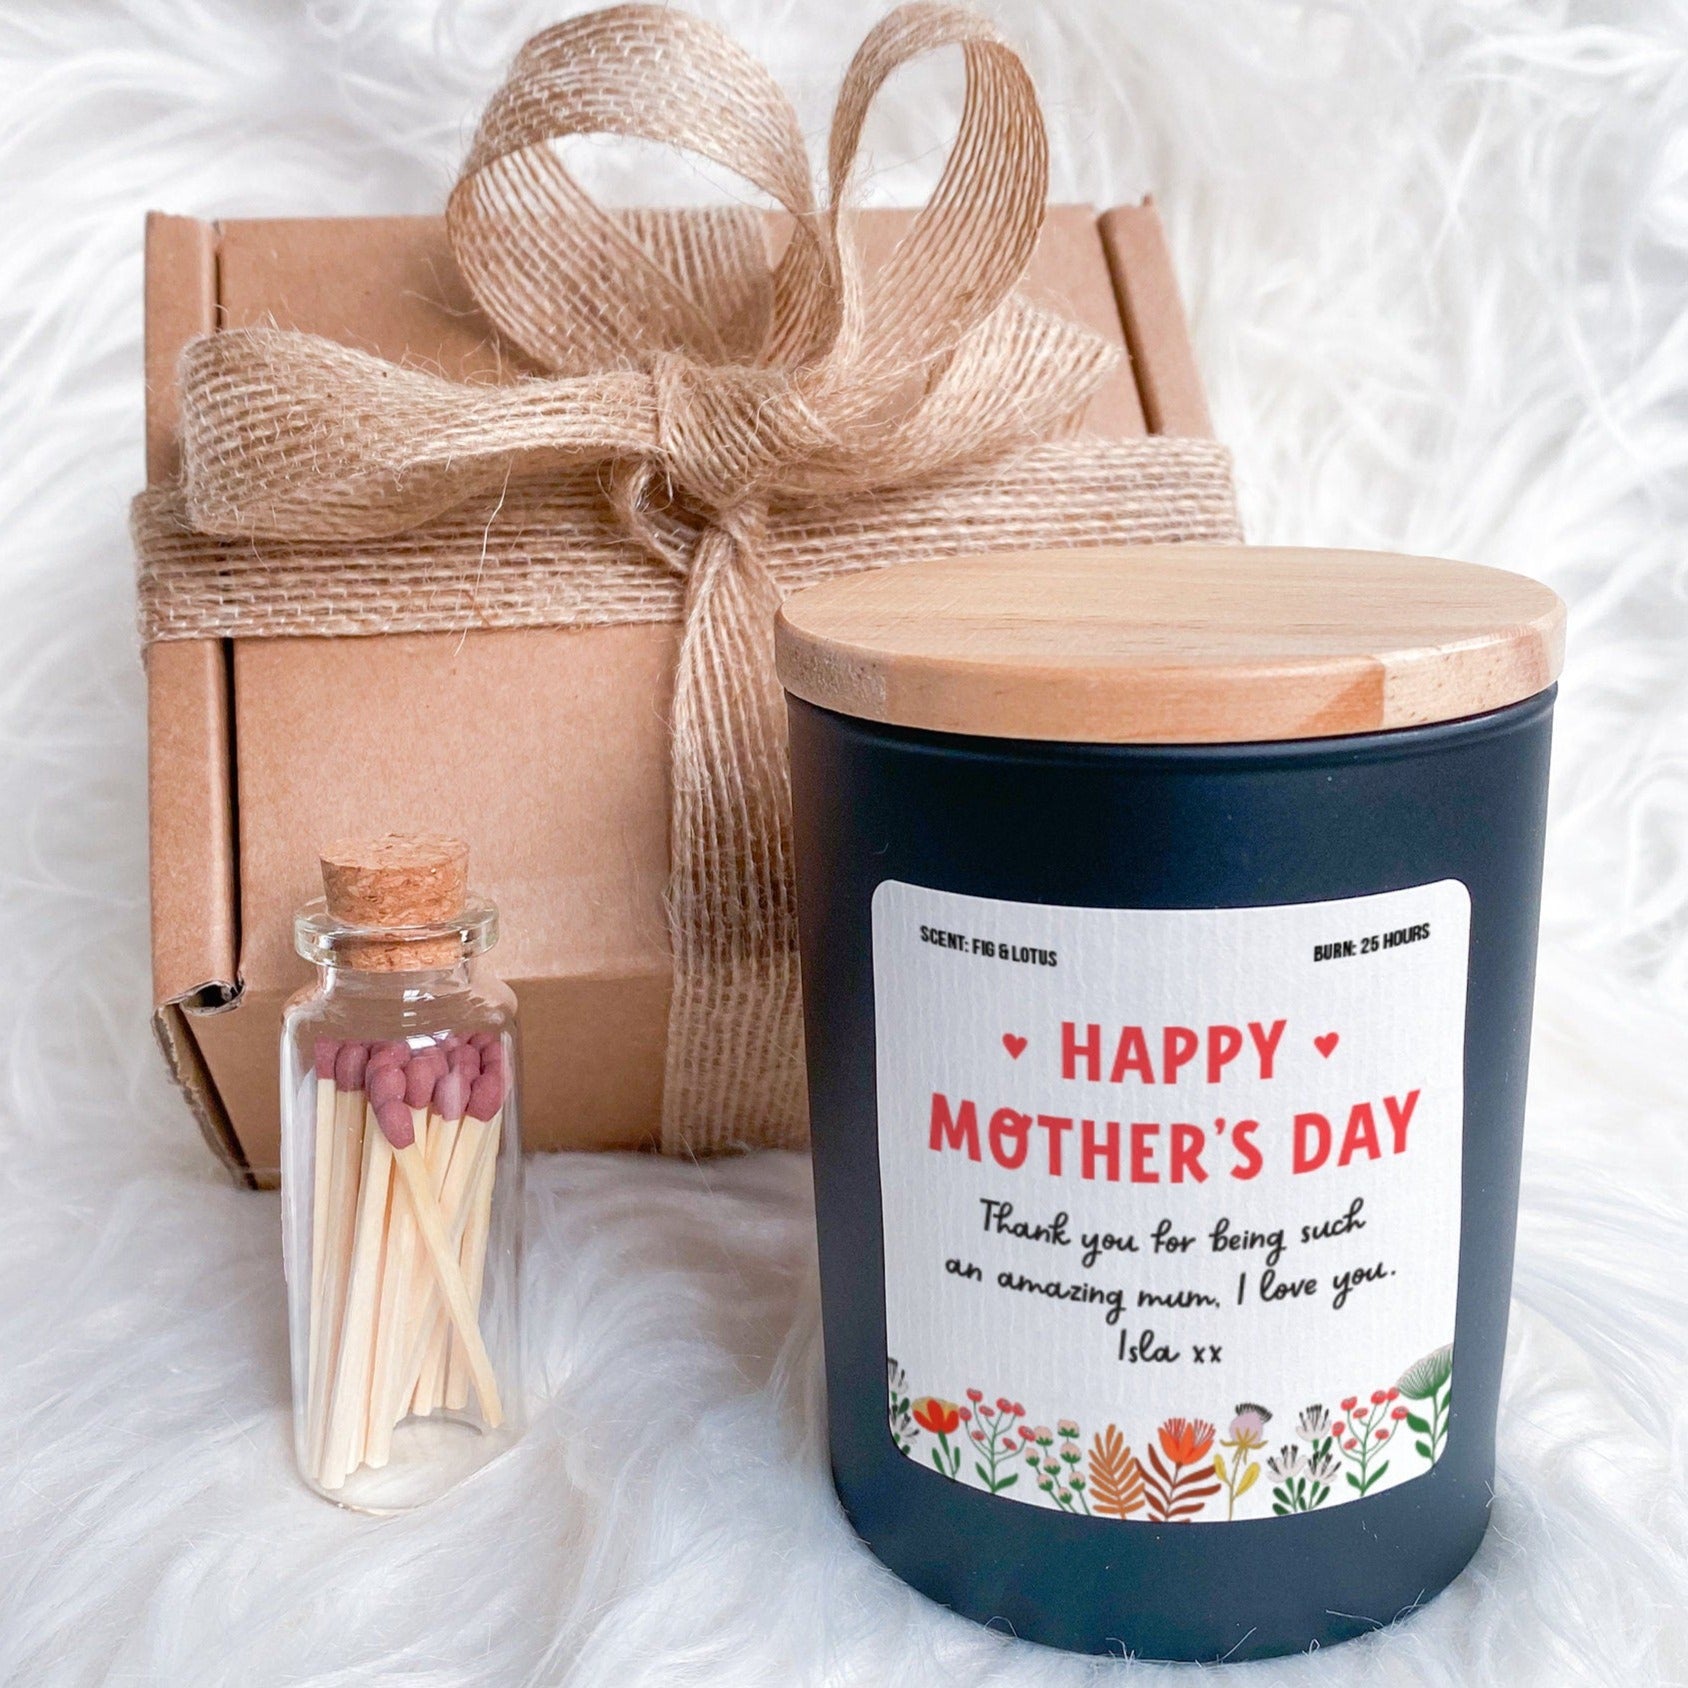 Happy Mother's Day scented soy wax vegan candle with your own text, Gift for mum mummy mama nanny nana gran granny First Mother's Day, 1st happyinky